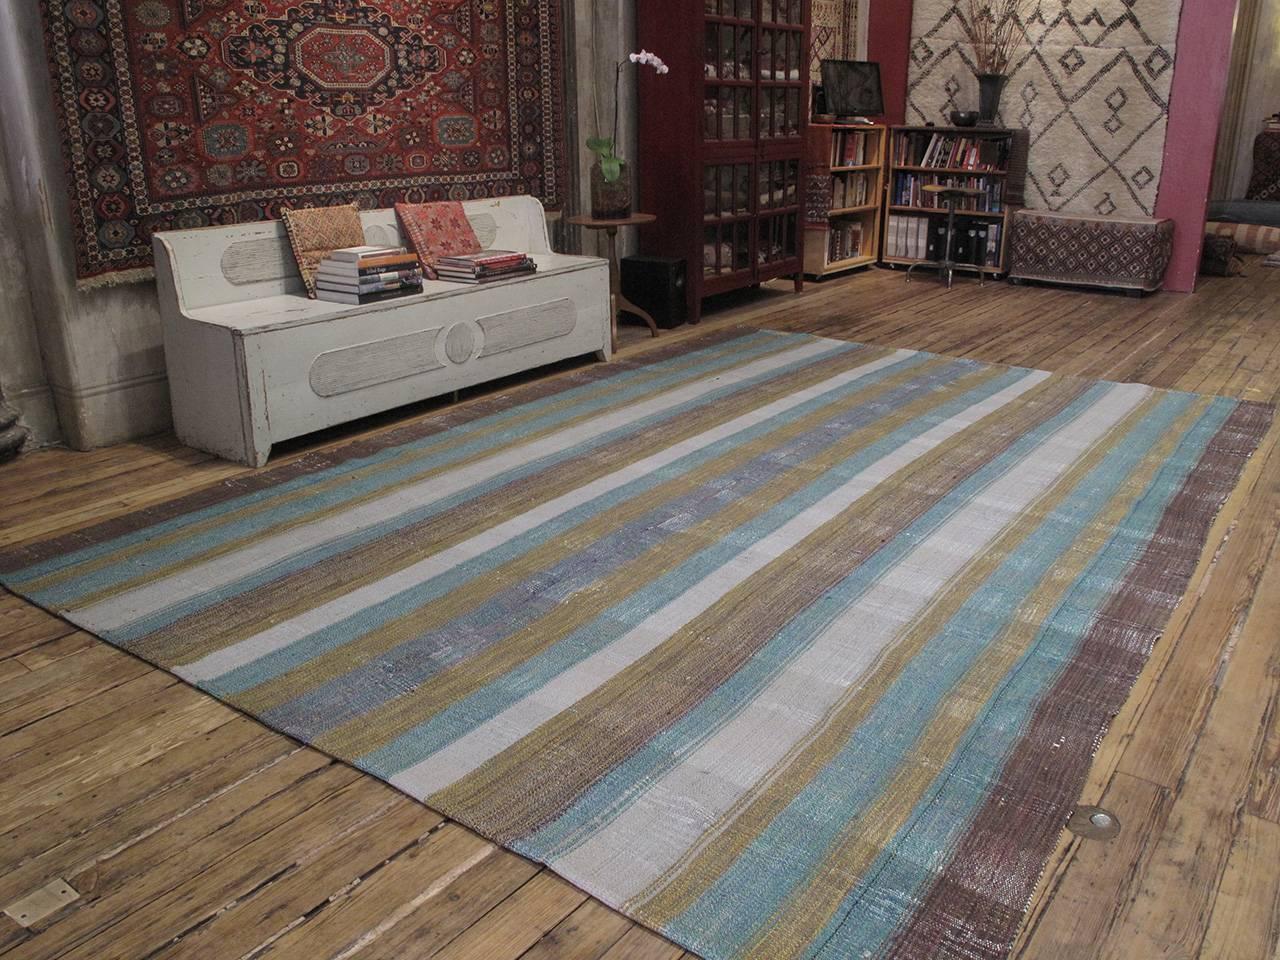 A fantastic example of this type in unusually large size. This is an old flat-weave from Central Turkey, woven with an ingenious mixture of cotton rag, wool and goat hair and used as a sturdy, everyday floor cover in the weaver's household. Great